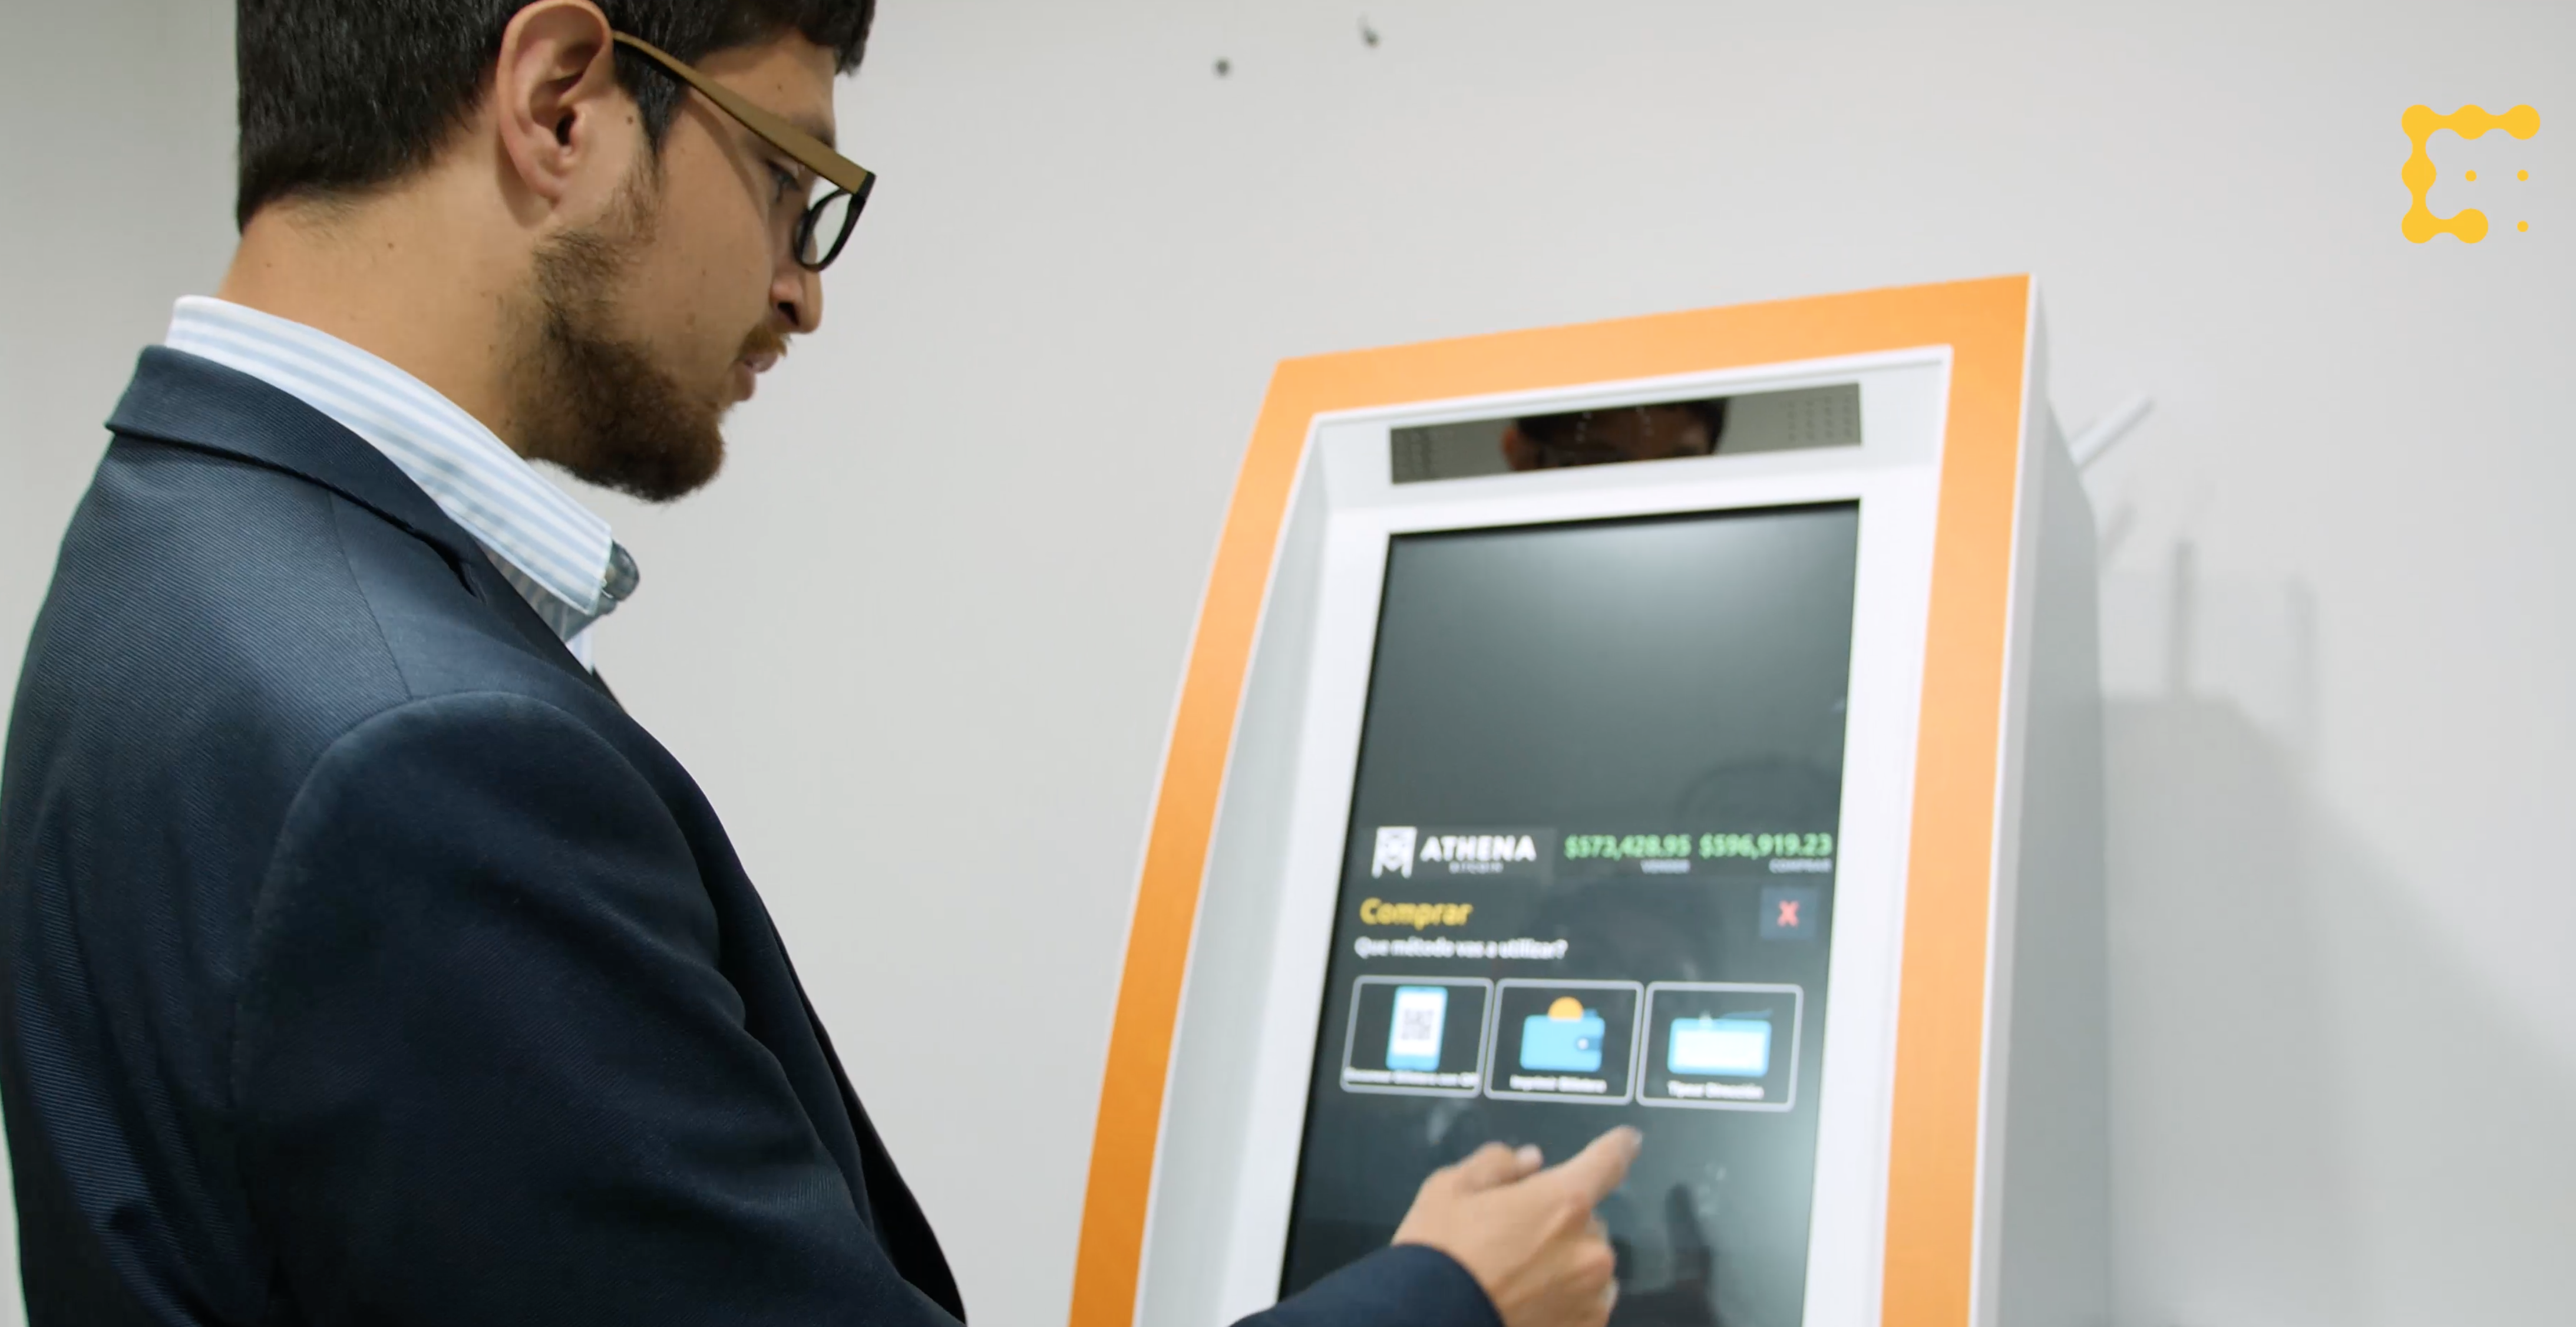 WATCH: Athena’s Bitcoin ATM Business Blooms In Argentina